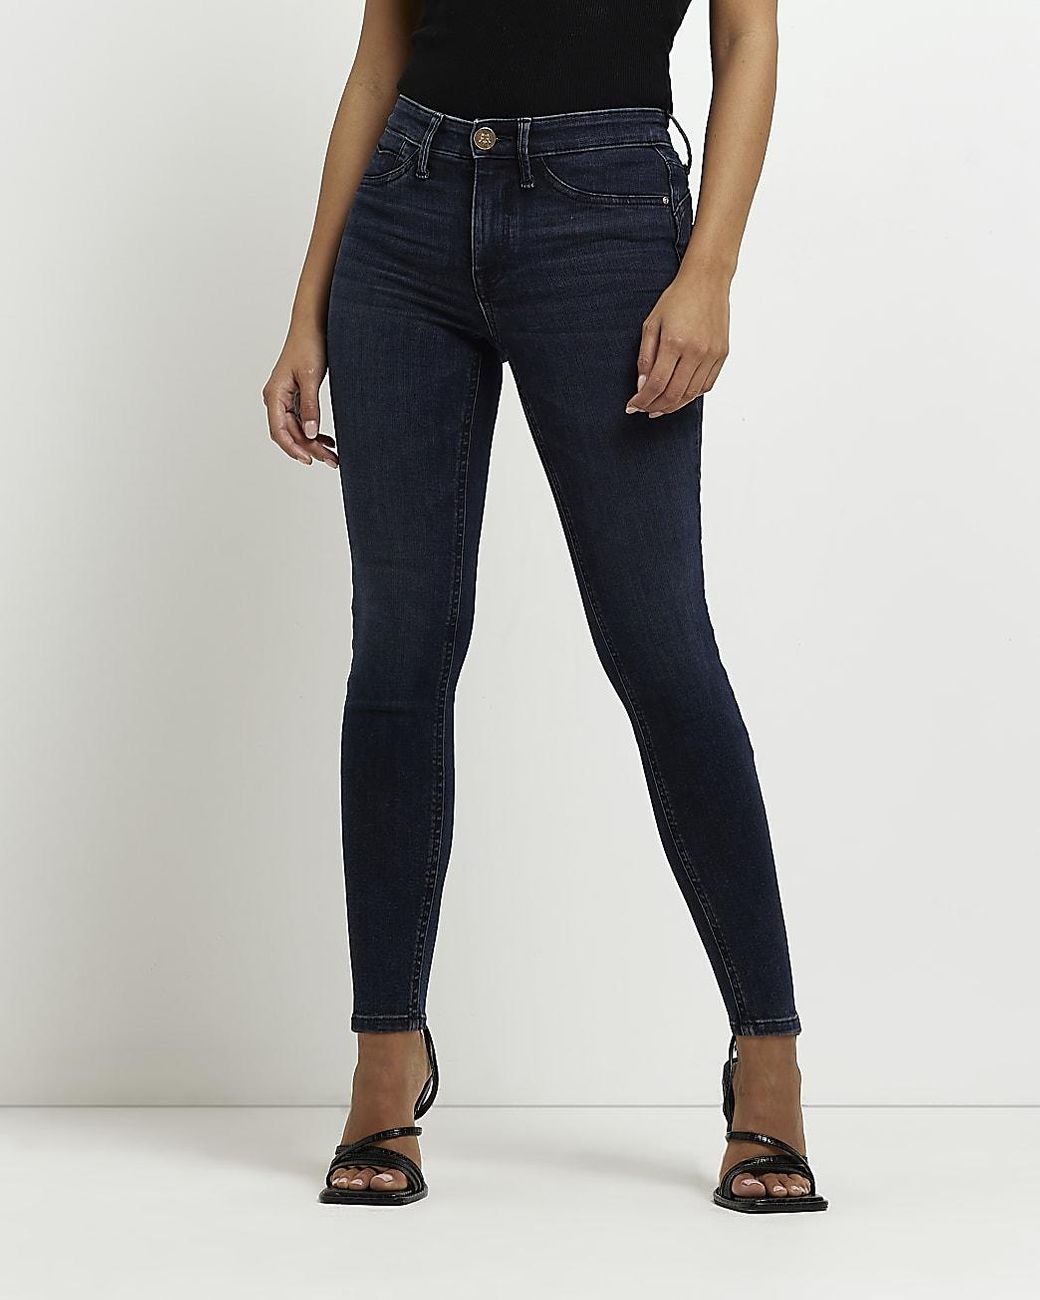 River Island Petite Molly Mid Rise Skinny Jeans in Blue | Lyst